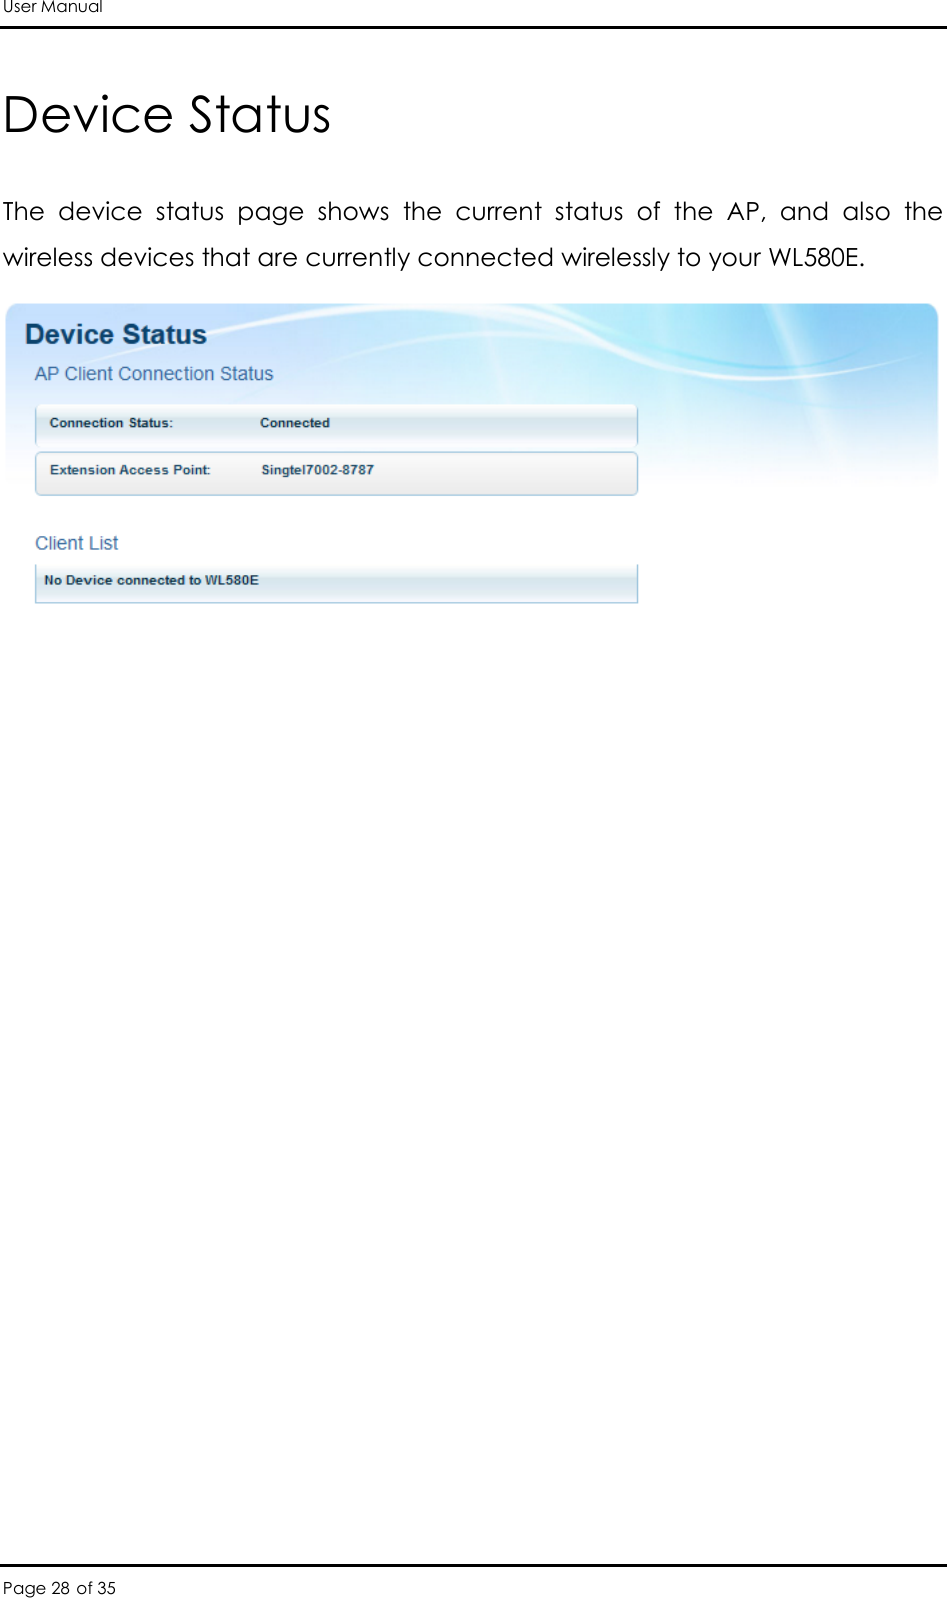 User Manual Page 28 of 35 Device Status The  device  status  page  shows  the  current  status  of  the  AP,  and  also  the wireless devices that are currently connected wirelessly to your WL580E.   